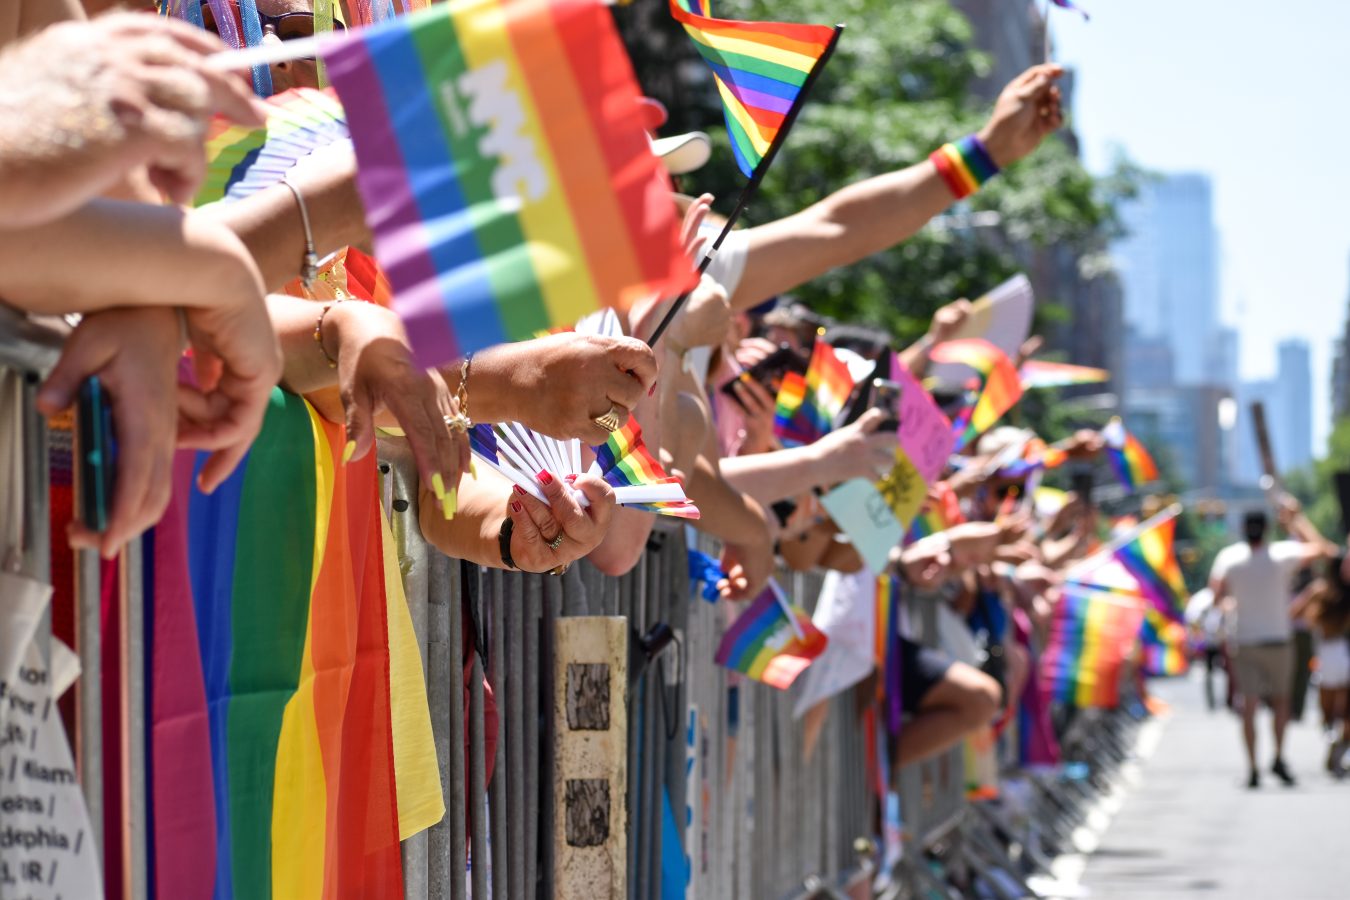 New Yorkers took part in the 53rd Annual Pride Parade through Fifth Avenue in New York City on June 26, 2022.